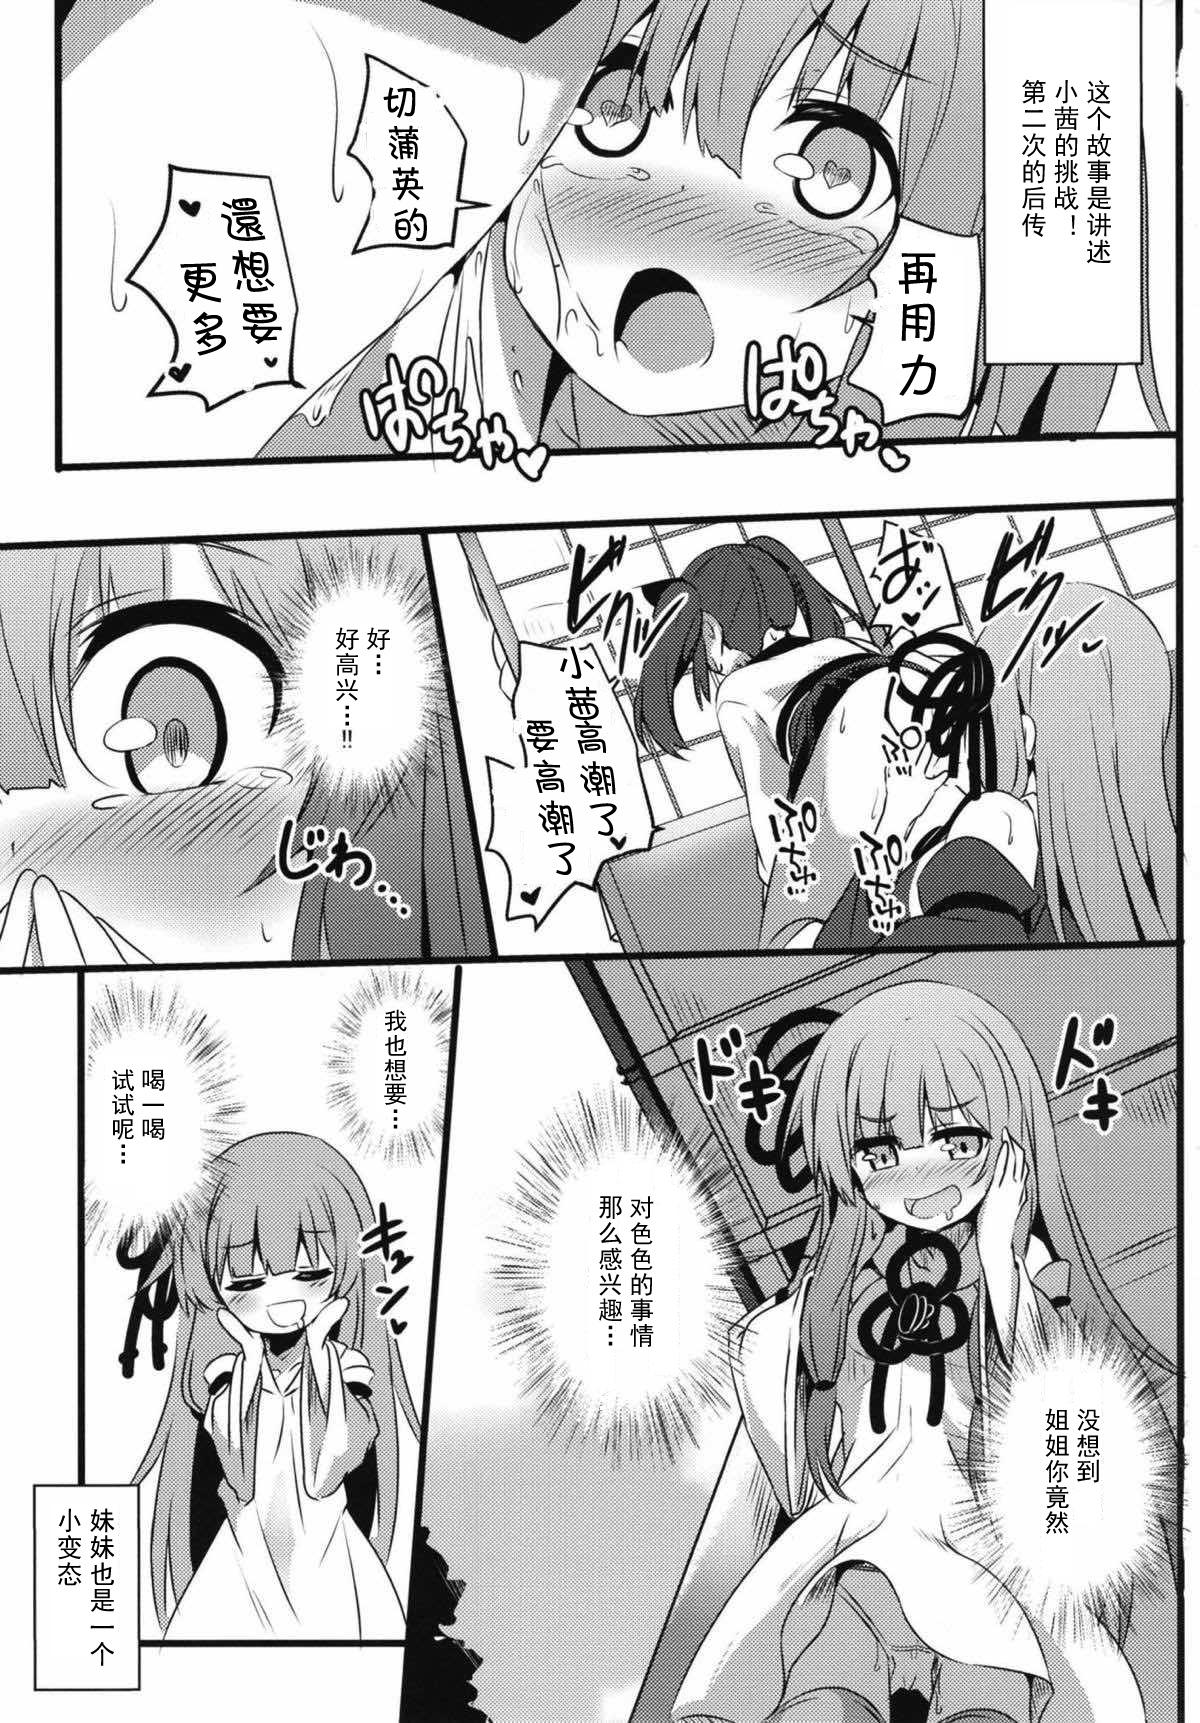 Deutsch (Kotonoha's Festa 2) [Milk Pudding (Jamcy)] Akane-chan Challenge! 2.5-kaime (VOICEROID) [Chinese] [古早个人汉化] - Voiceroid Point Of View - Page 3